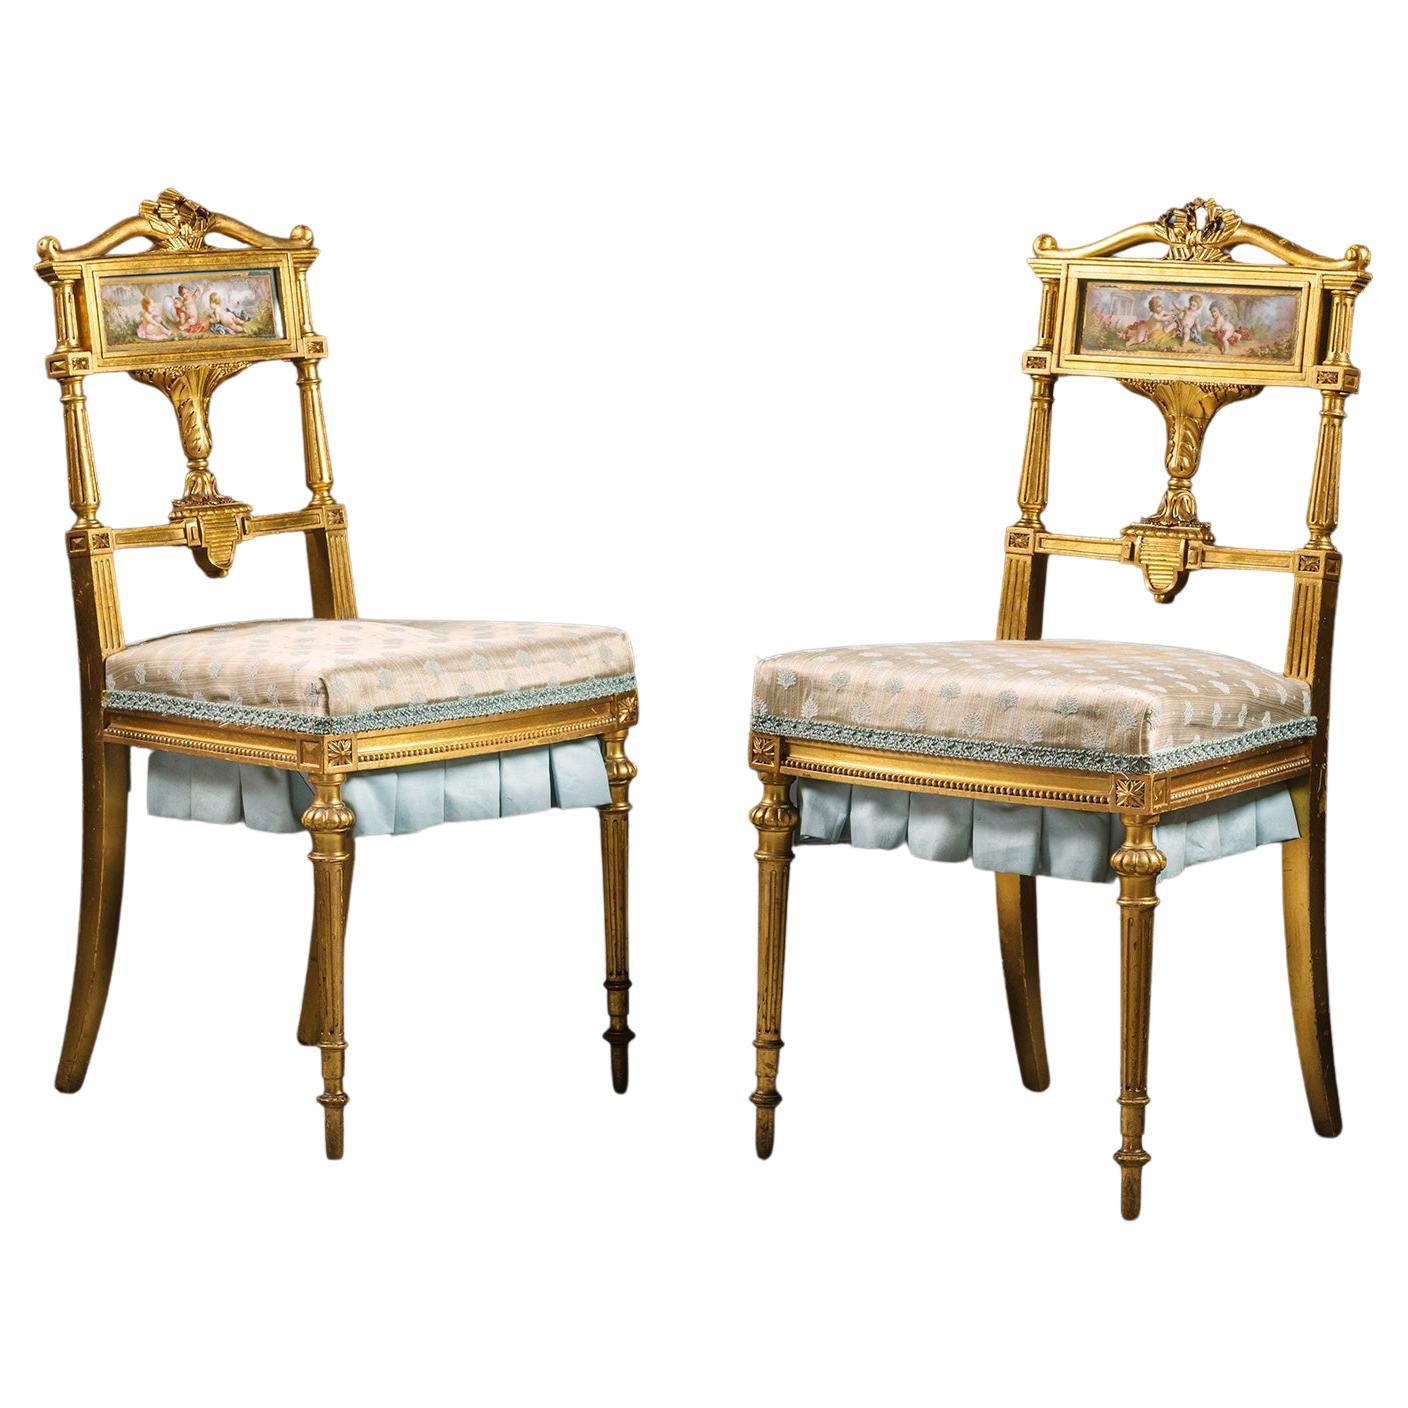 Pair of Louis XVI Style Giltwood and Sèvres-Style Porcelain Mounted Salon Chairs For Sale